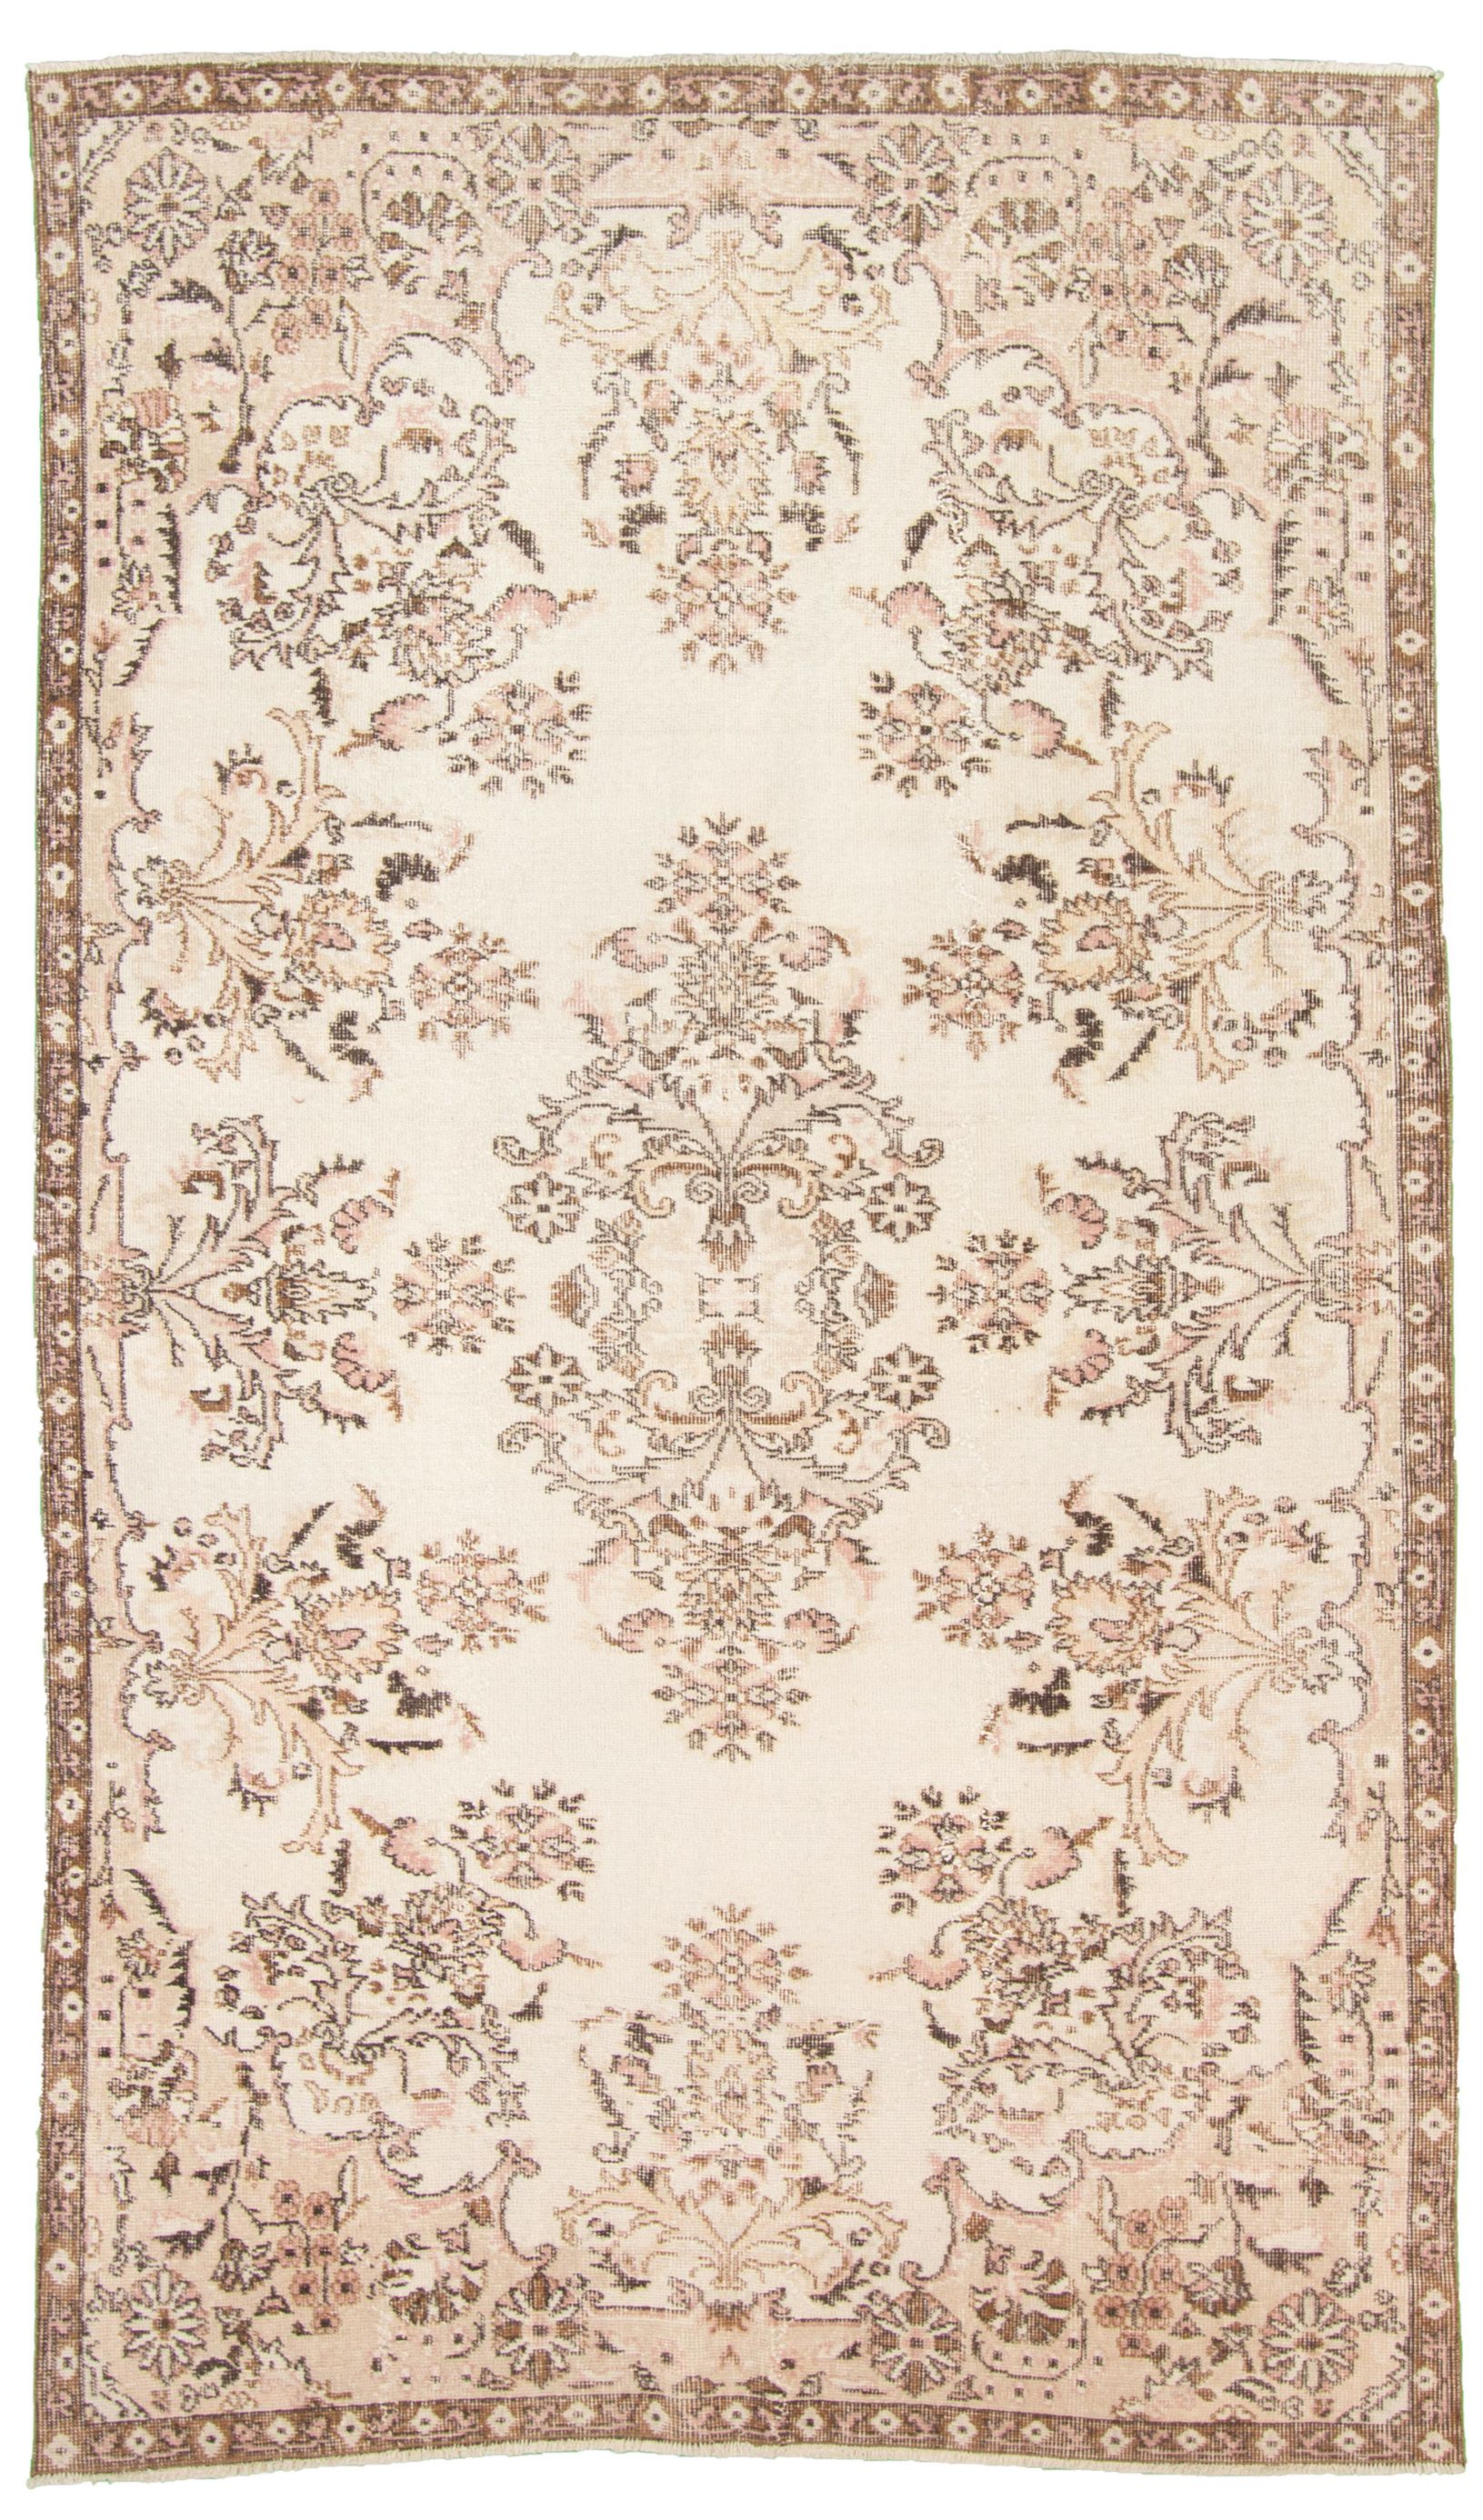 Hand-knotted Antalya Vintage   Rug 8'11" x 5'5" Size: 5'5" x 8'11"  